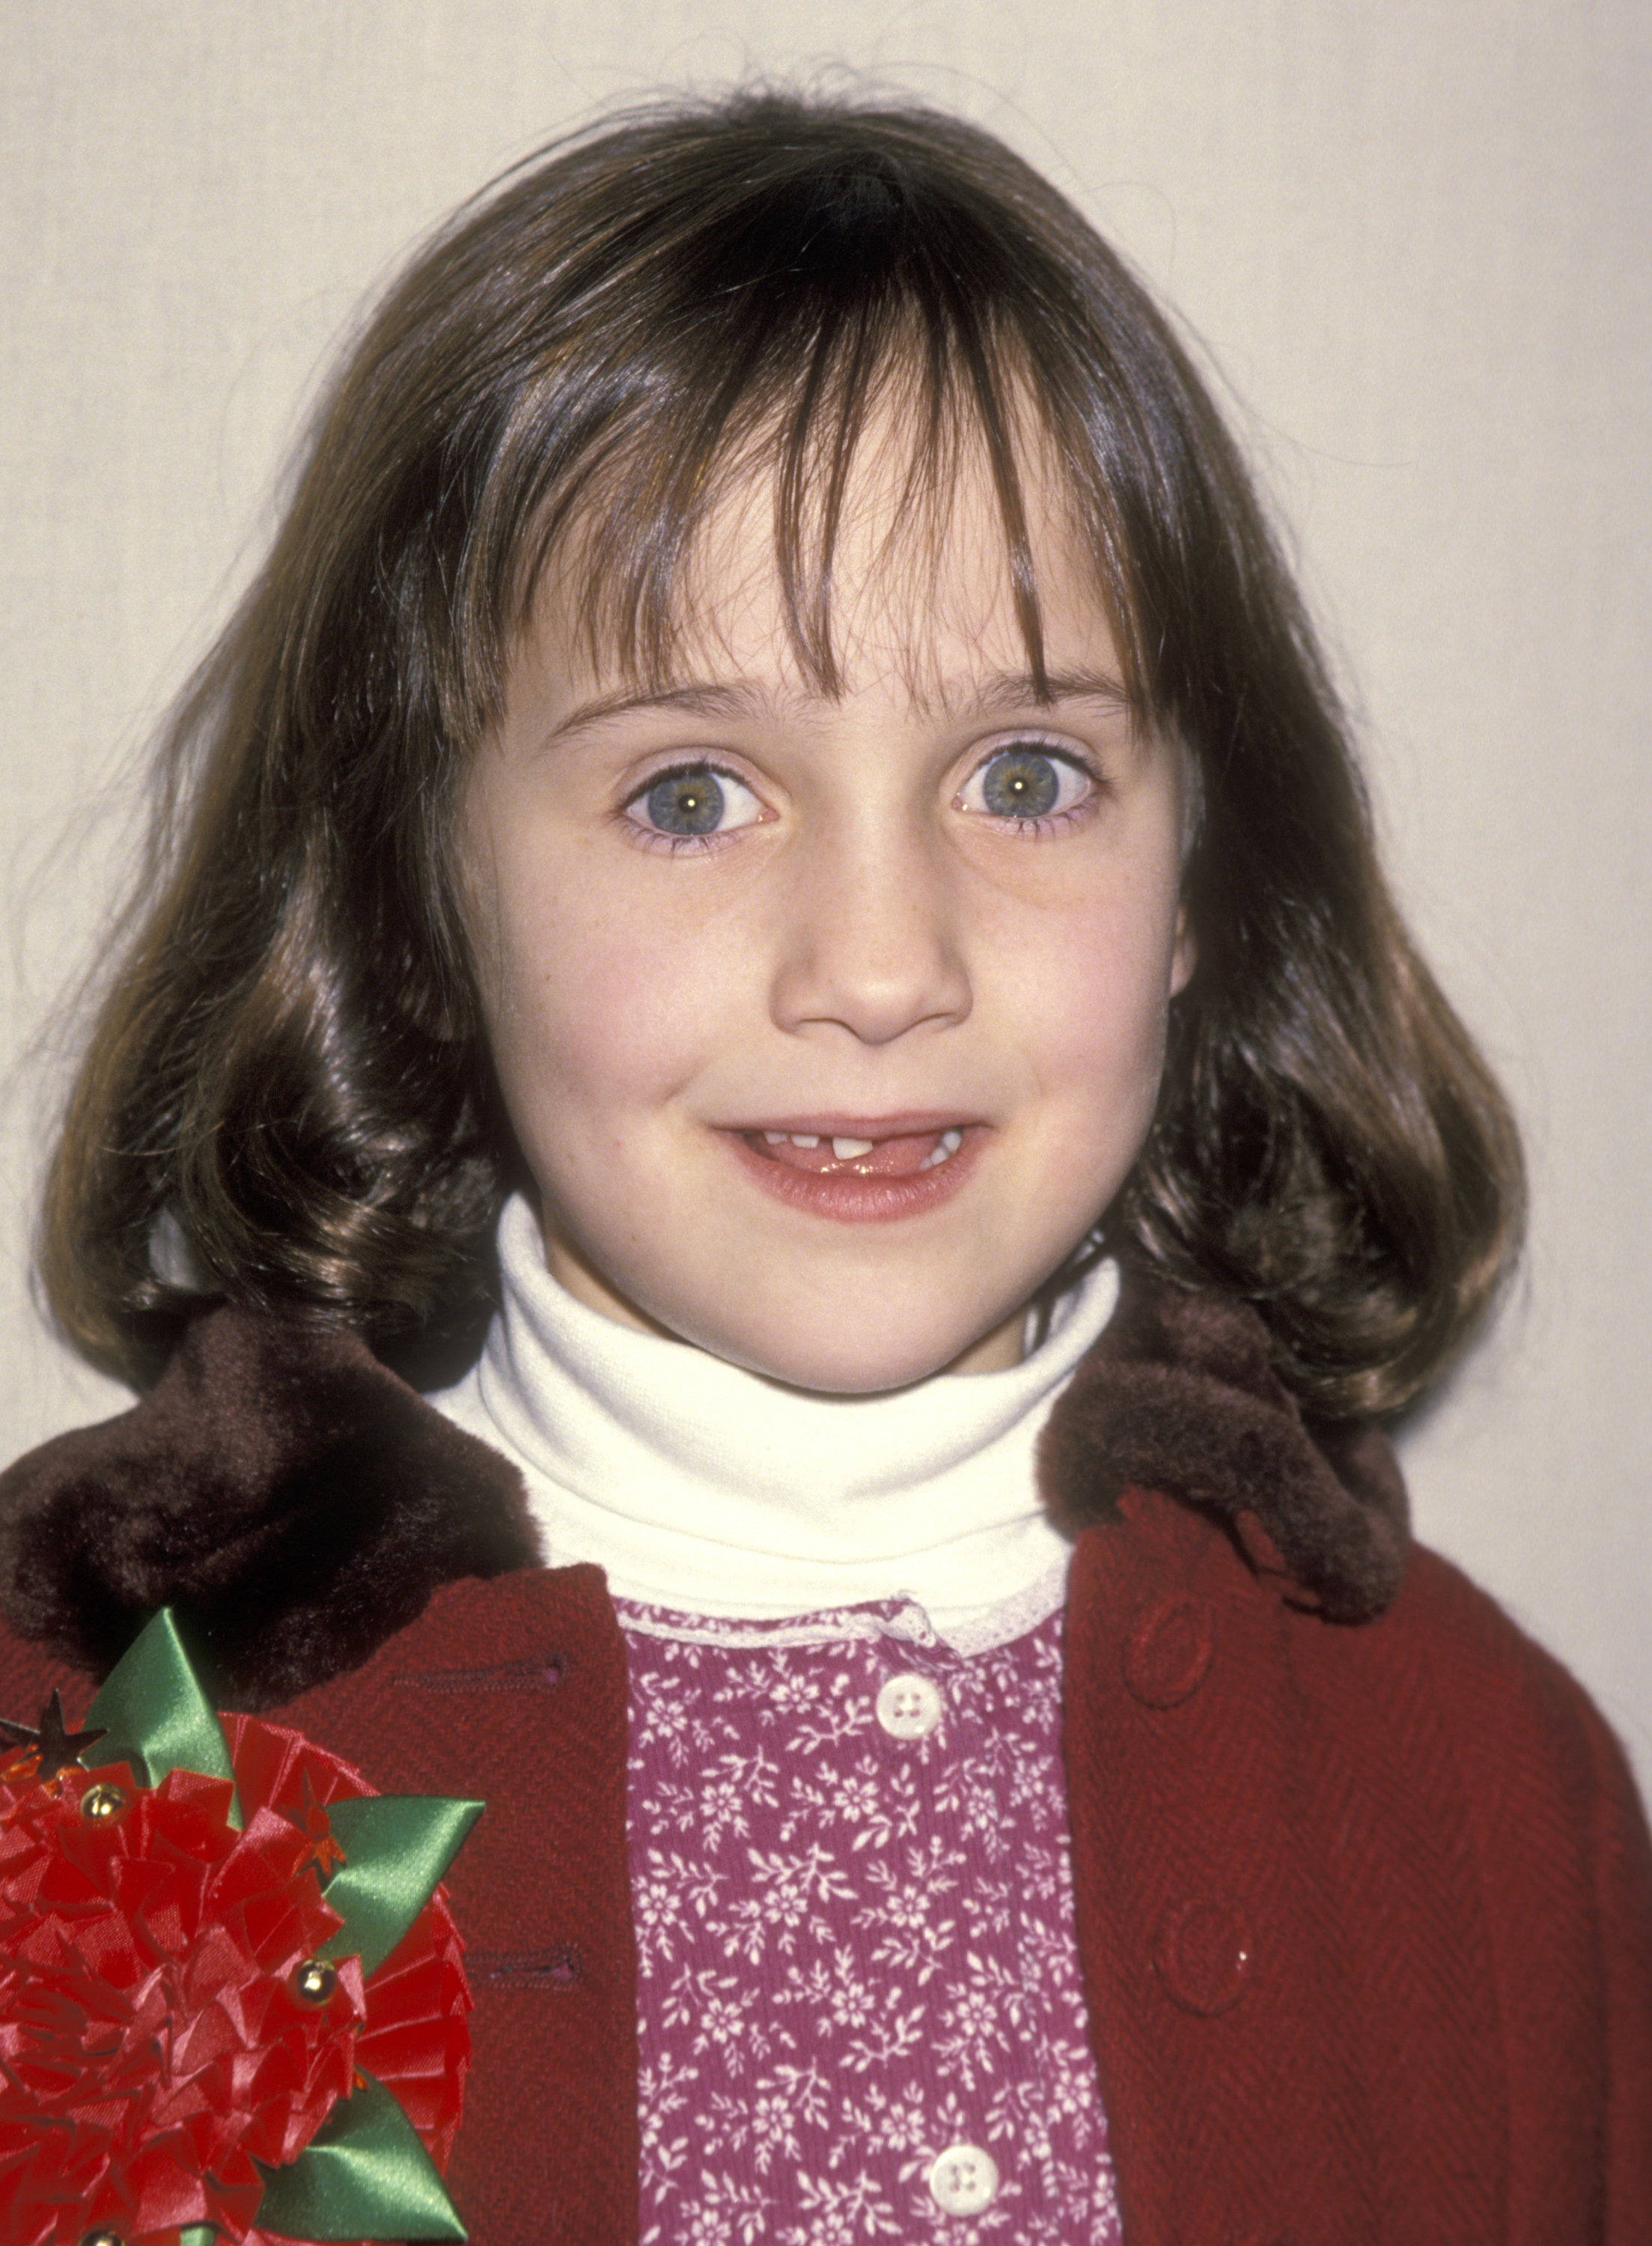 Mara Wilson attends the 63rd Annual Hollywood Christmas Parade at KTLA Studios in Hollywood, California, on November 27, 1994. | Source: Getty Images